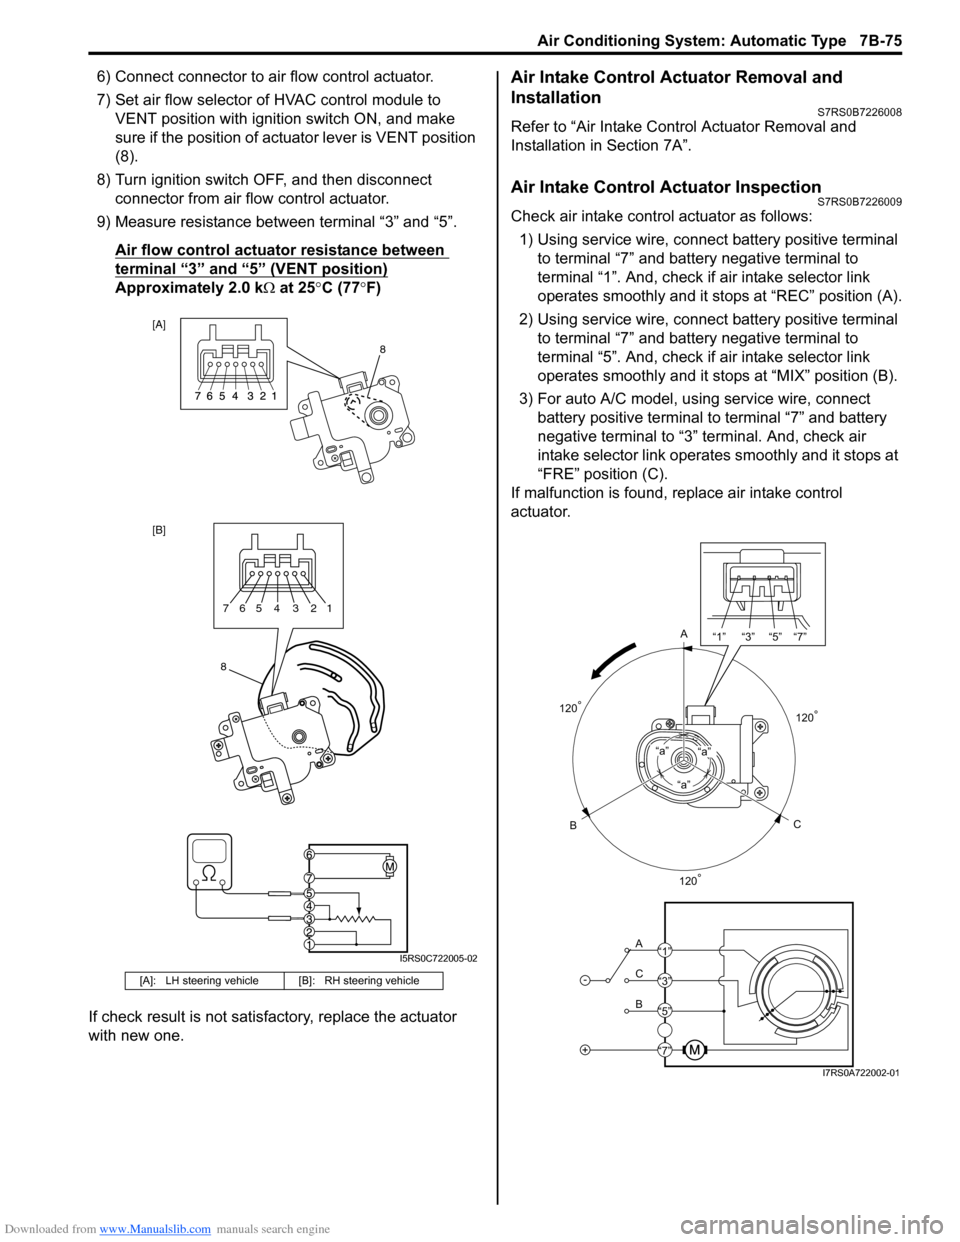 SUZUKI SWIFT 2007 2.G Service Workshop Manual Downloaded from www.Manualslib.com manuals search engine Air Conditioning System: Automatic Type 7B-75
6) Connect connector to air flow control actuator.
7) Set air flow selector of HVAC control modul